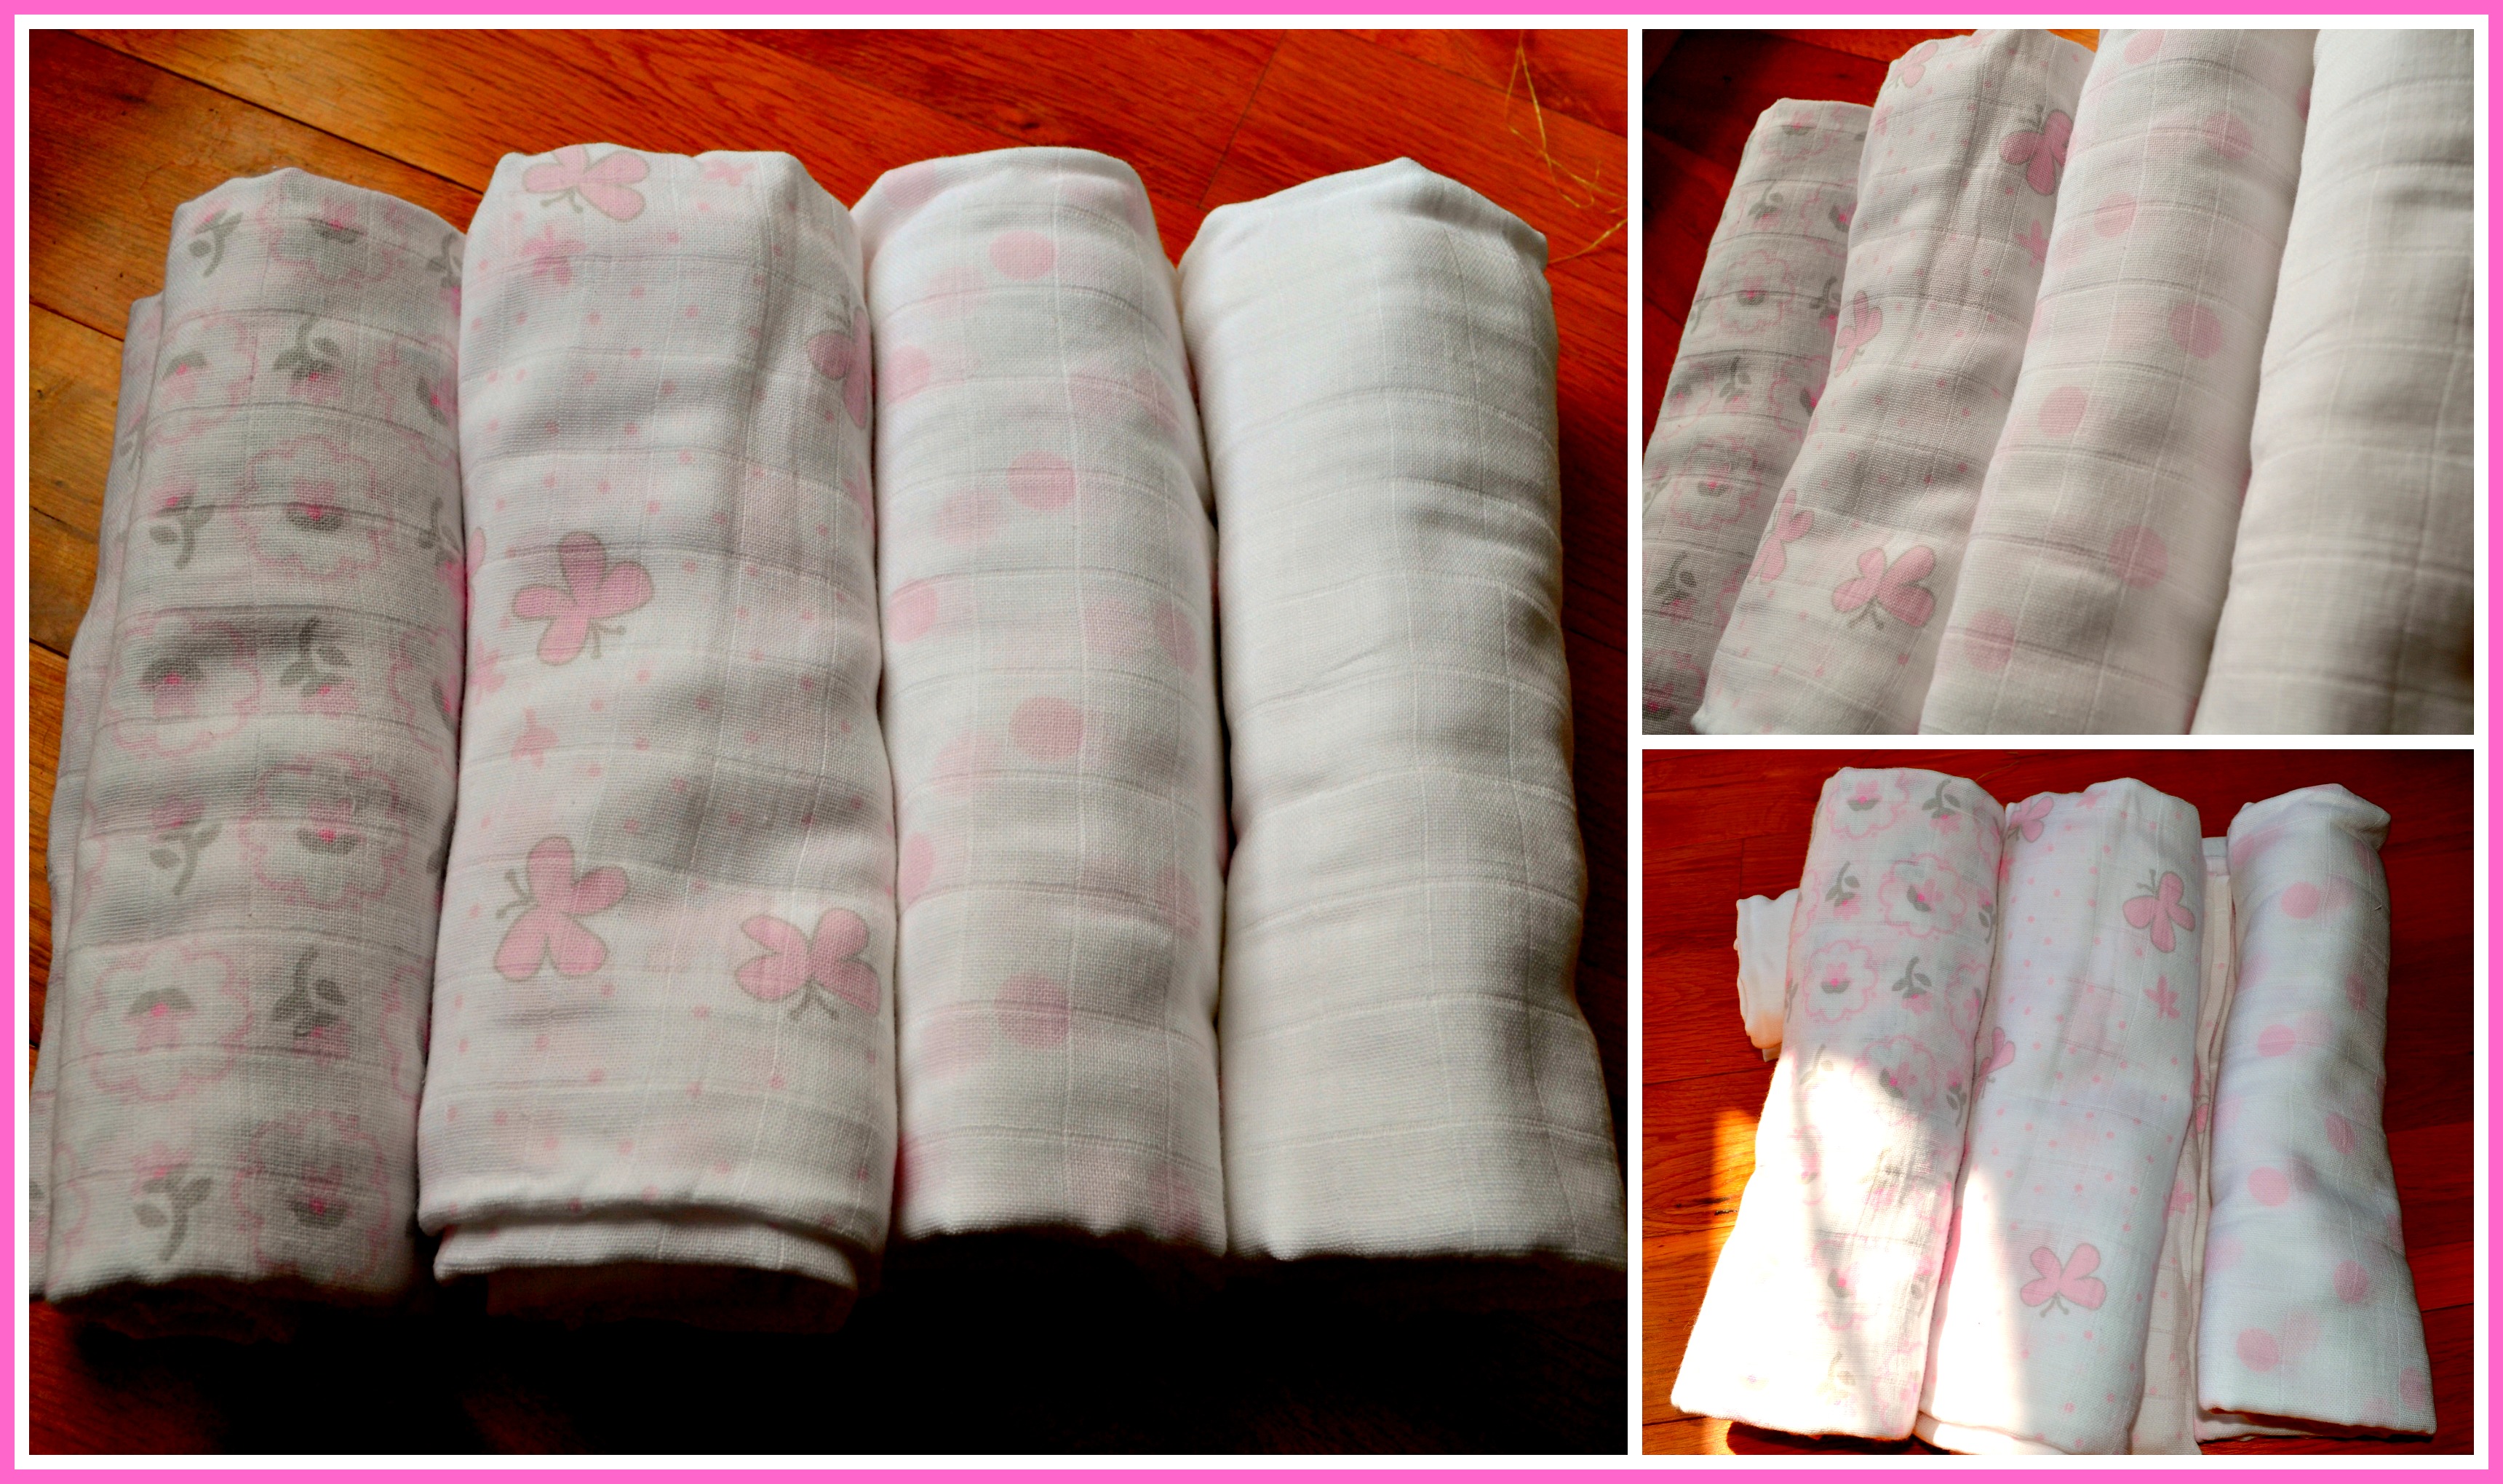 SwaddleDesigns Muslin Swaddle Blankets Review (Getting Ready For Baby Gift Guide)